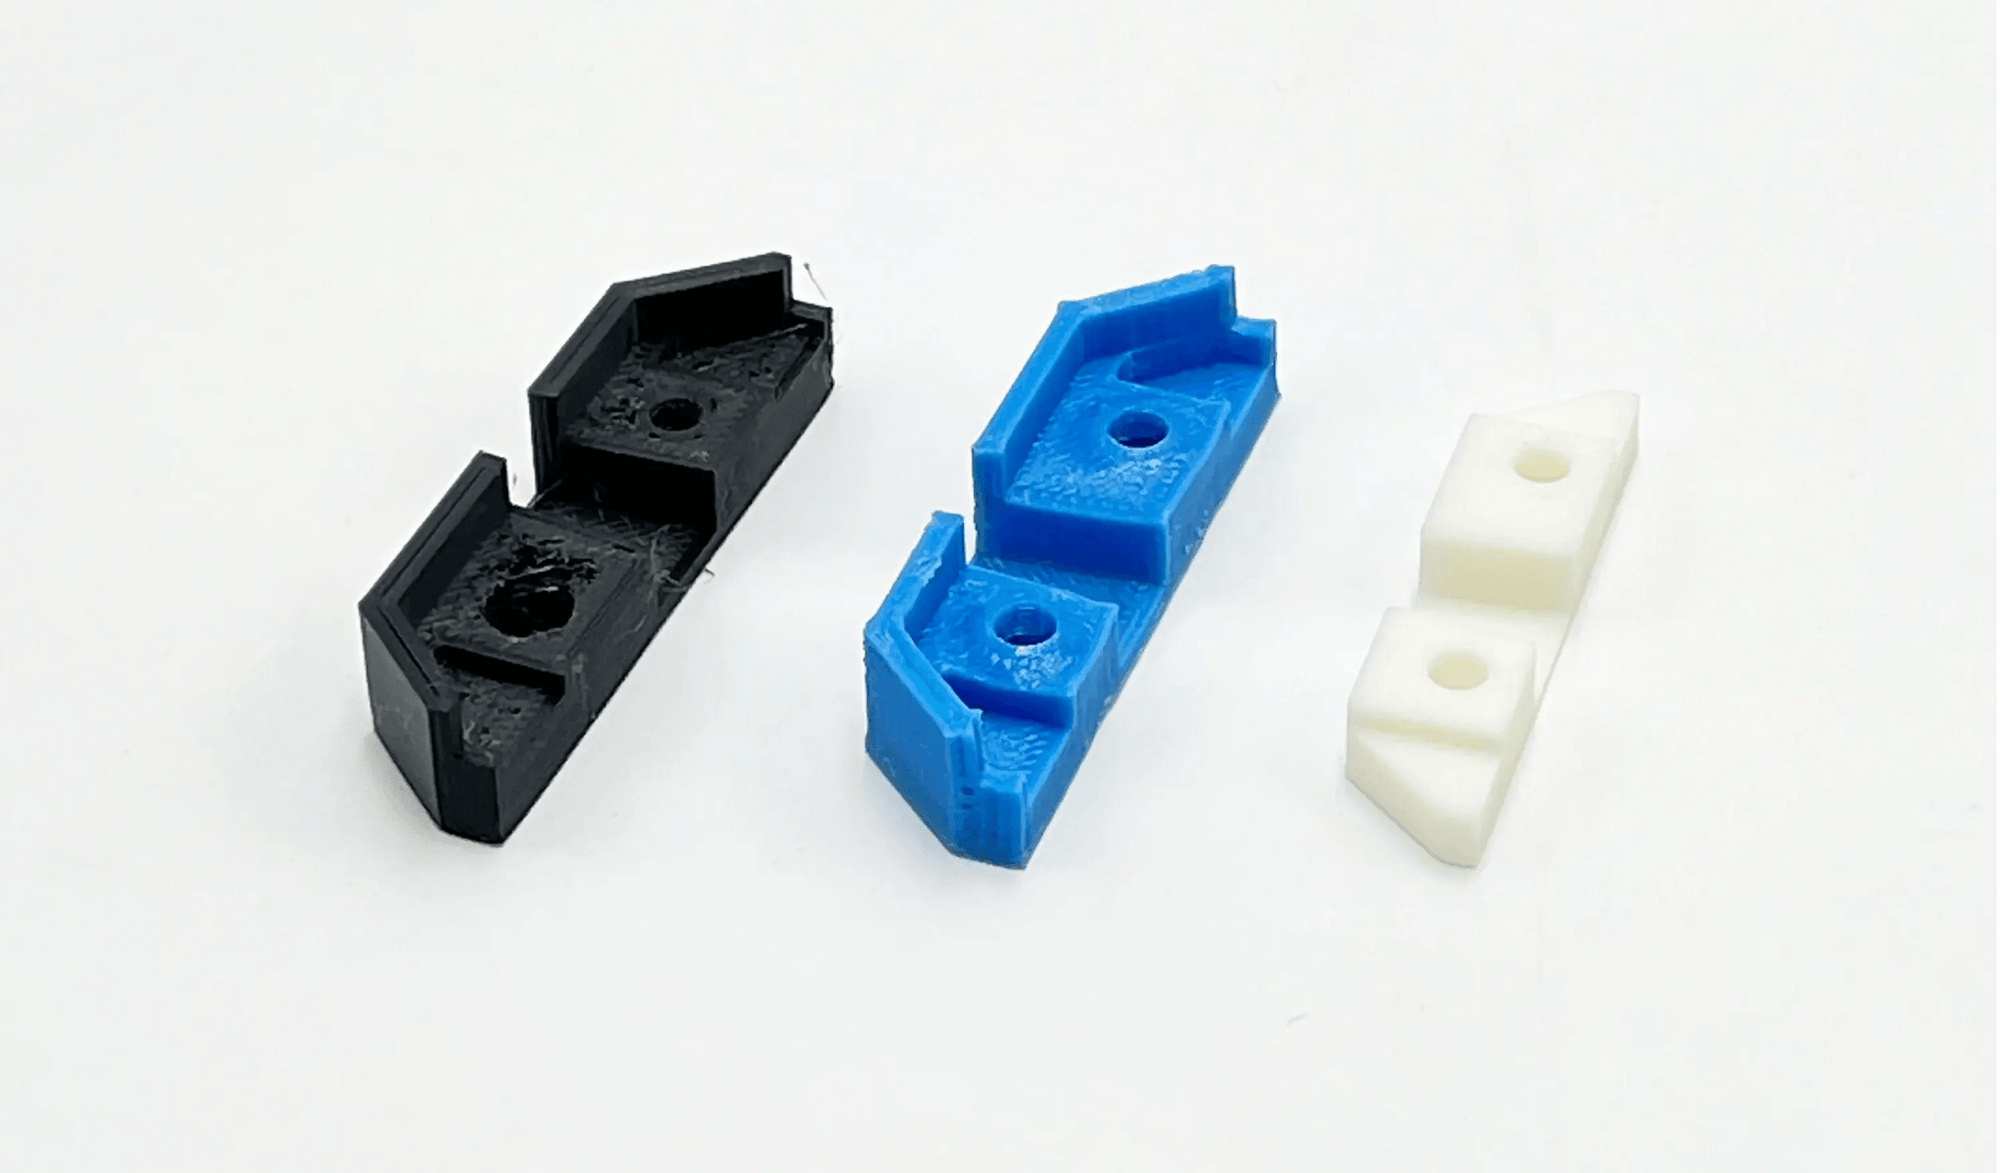 Using 3D Printing to Prototype and Test Products